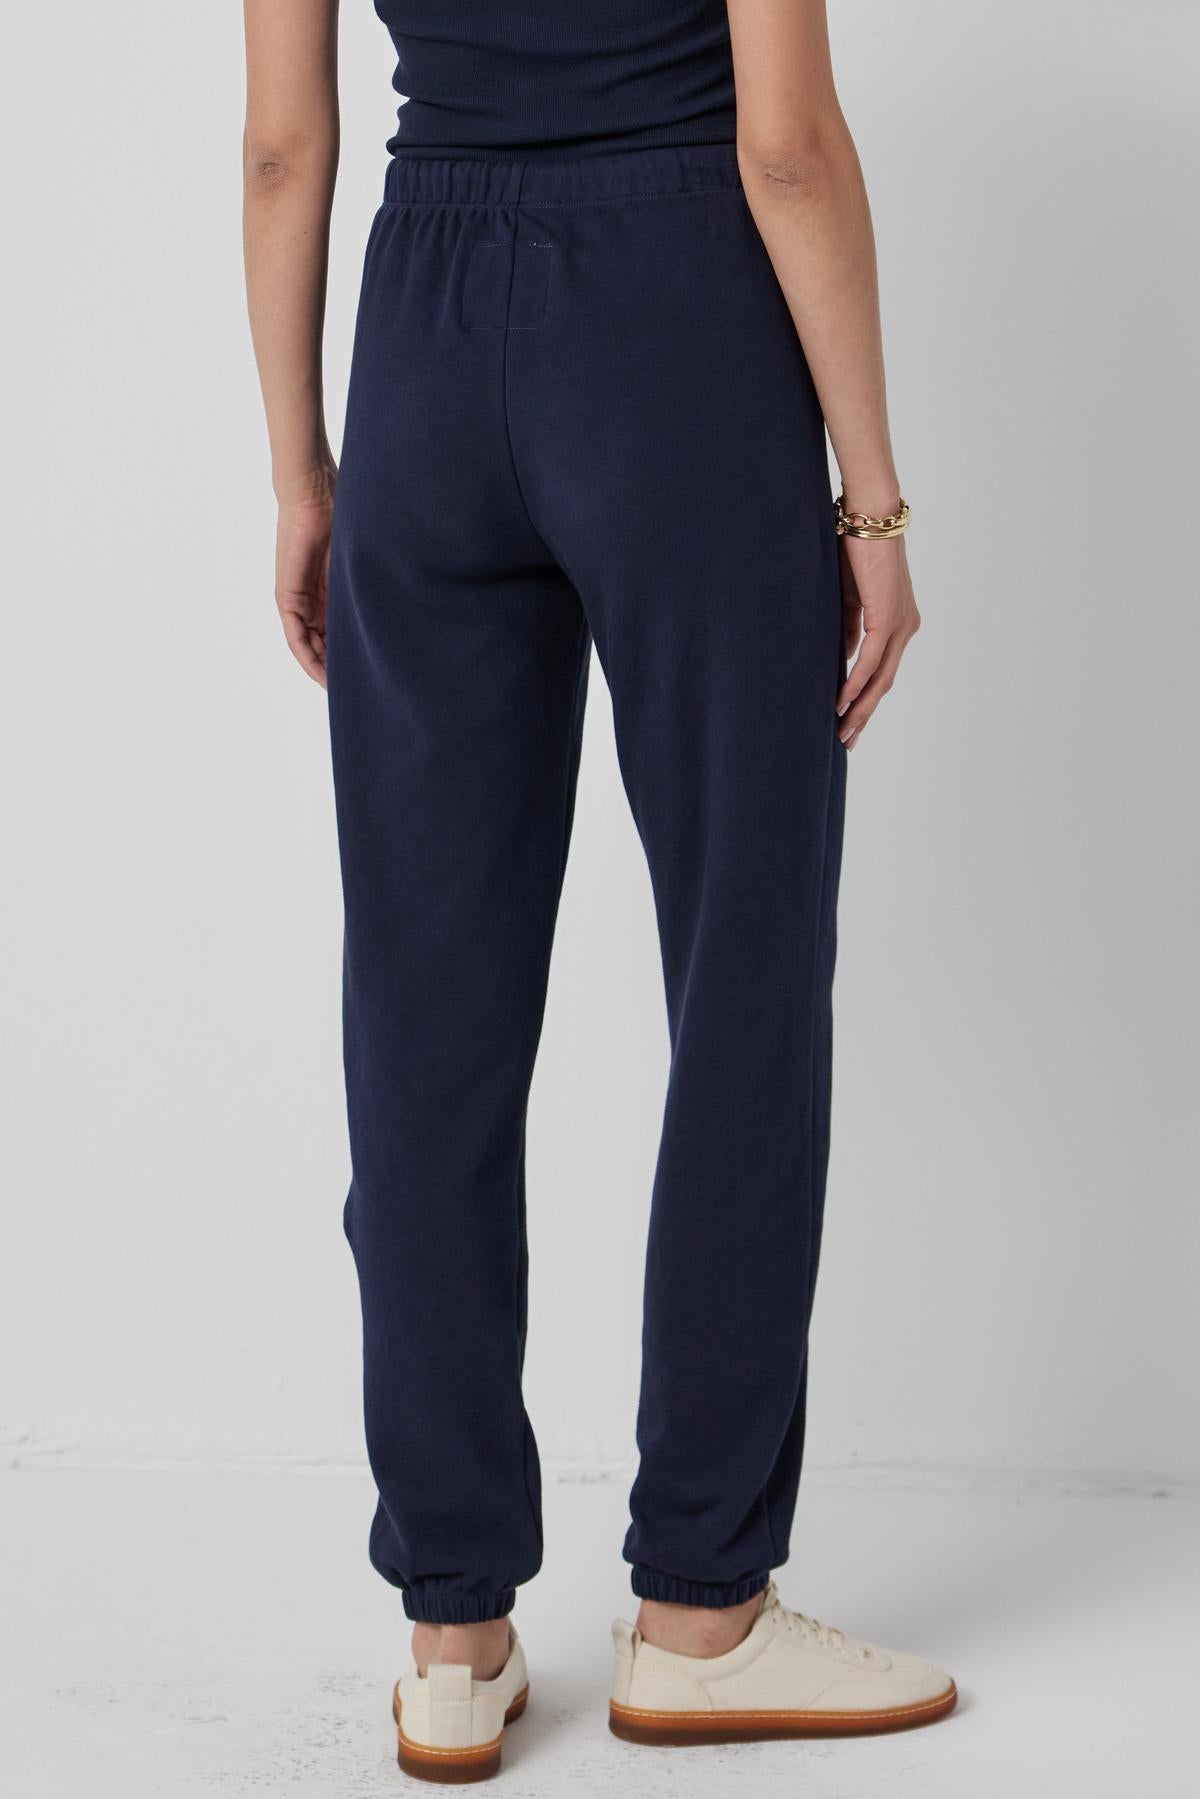 The back view of a woman wearing Velvet by Jenny Graham's WESTLAKE SWEATPANT.-36168729788609